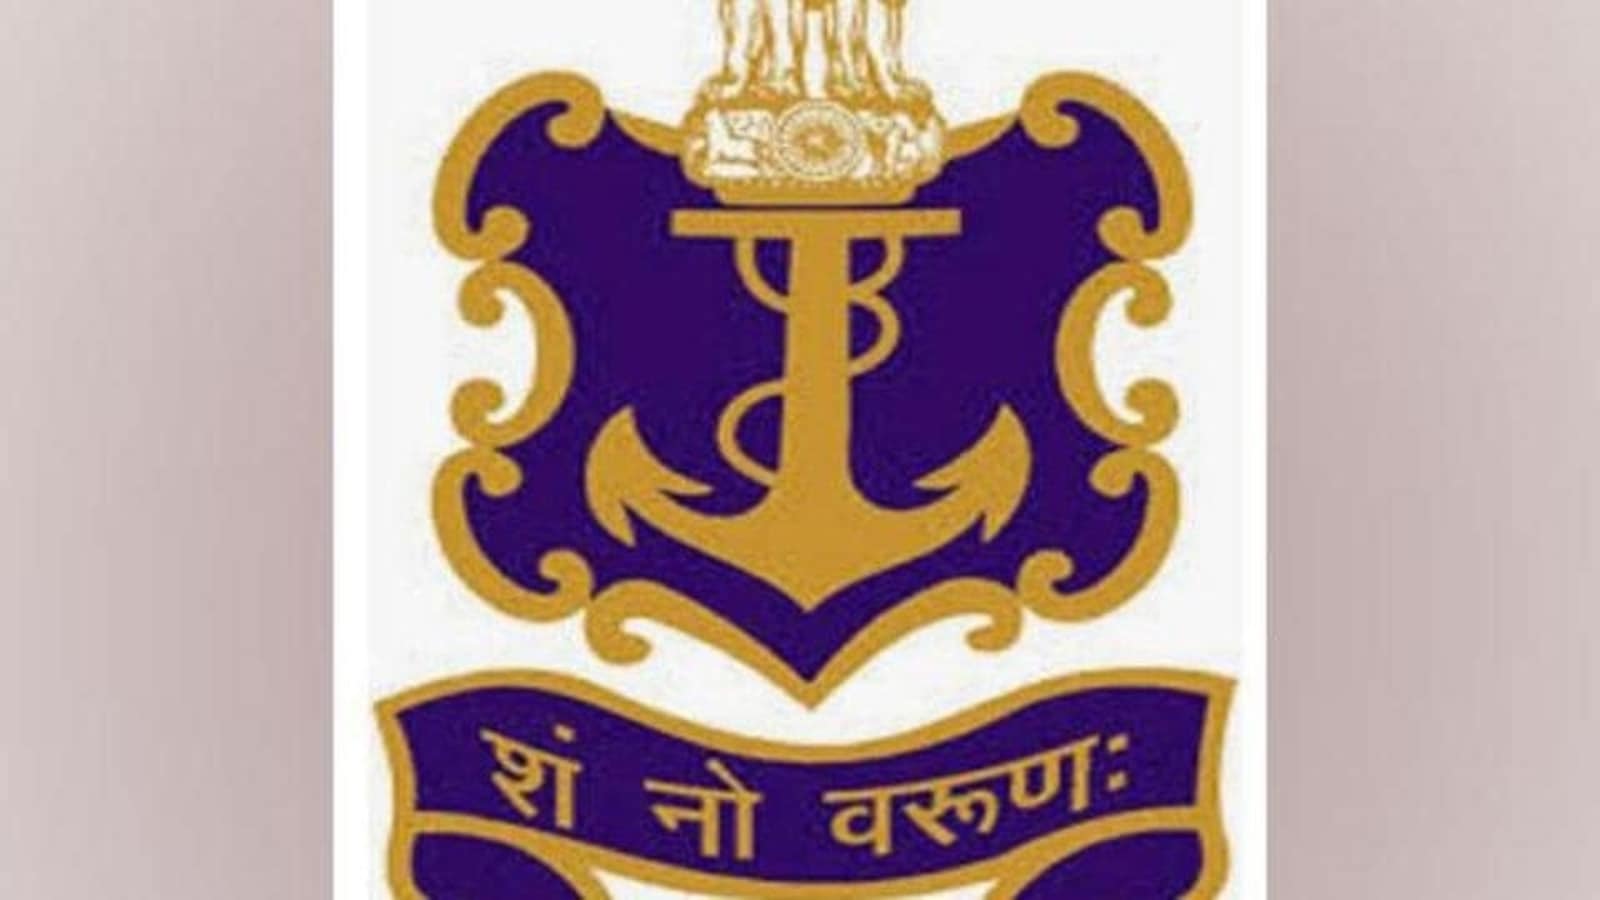 Join Indian Navy 2021: Apply for 50 SSC Officer posts on joinindiannavy.gov.in